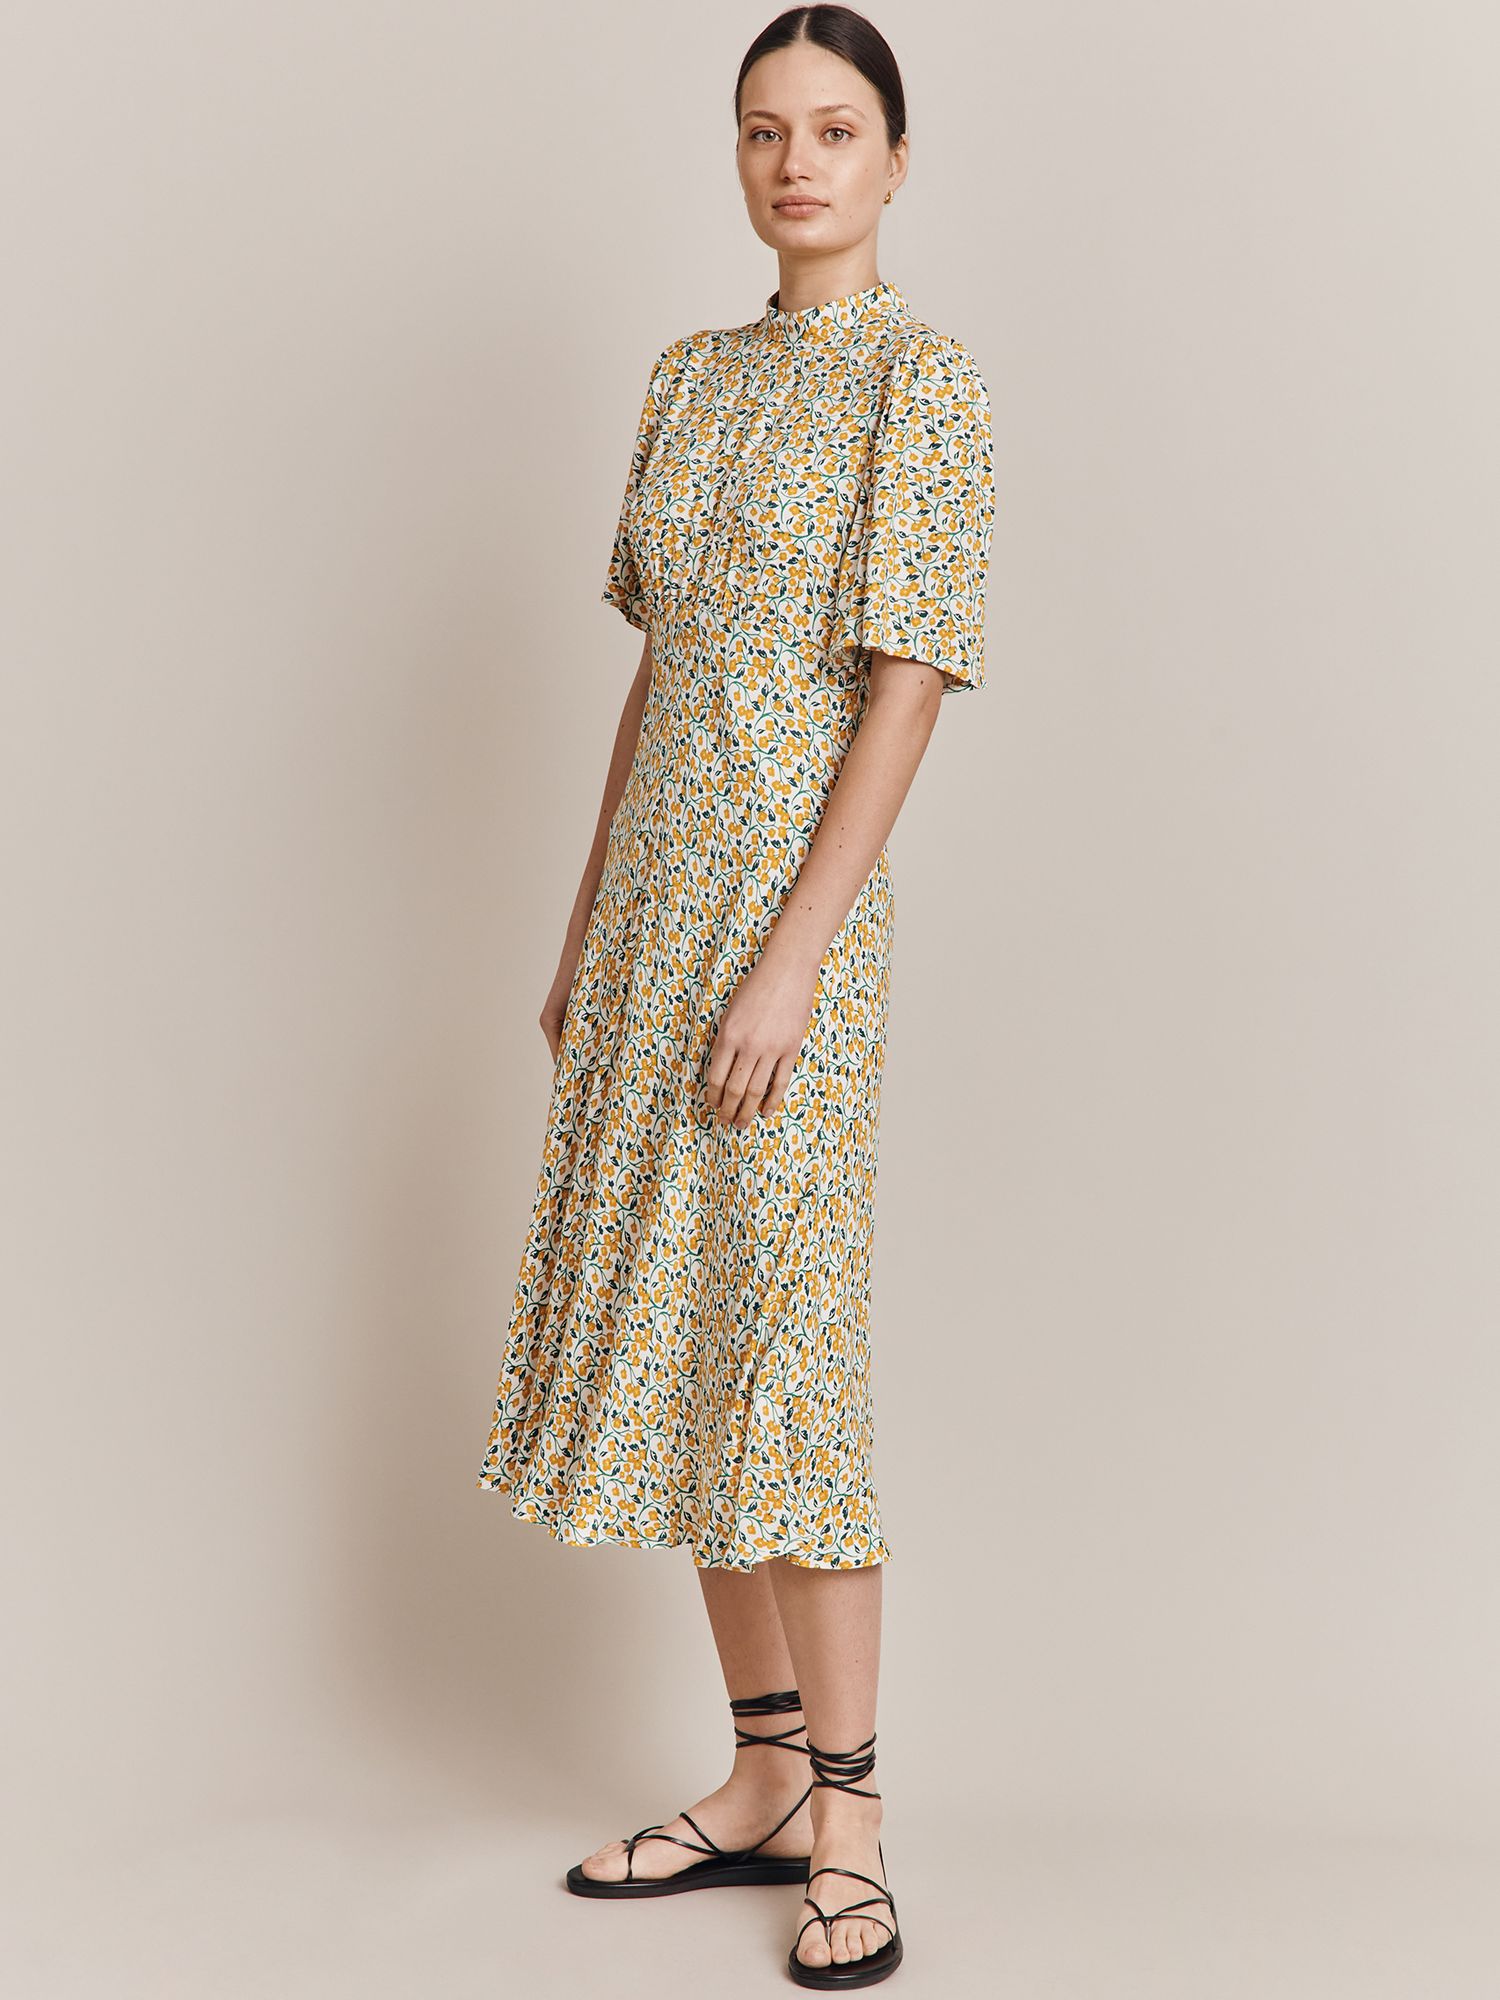 Ghost Penny Floral Midi Dress, Yellow Buttercup at John Lewis & Partners